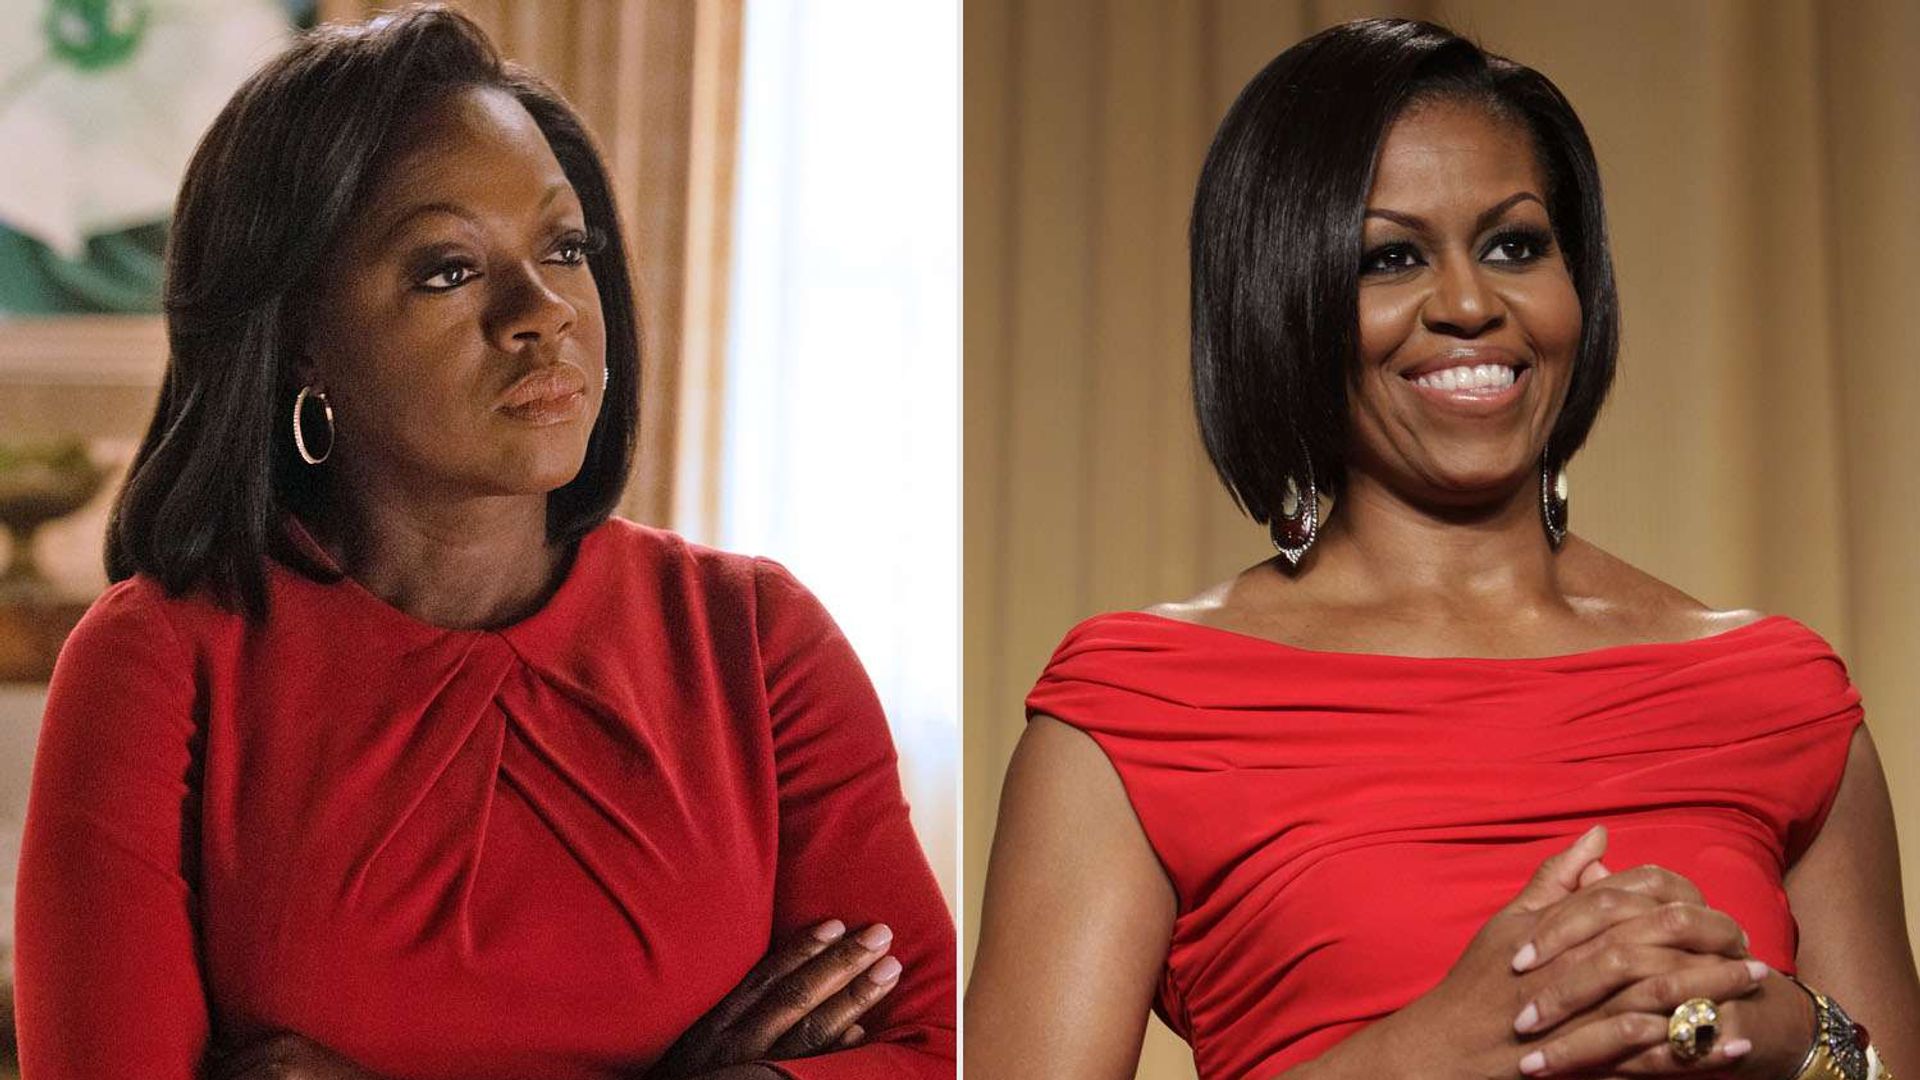 Viola Davis played Michelle Obama in the series “The First Lady”